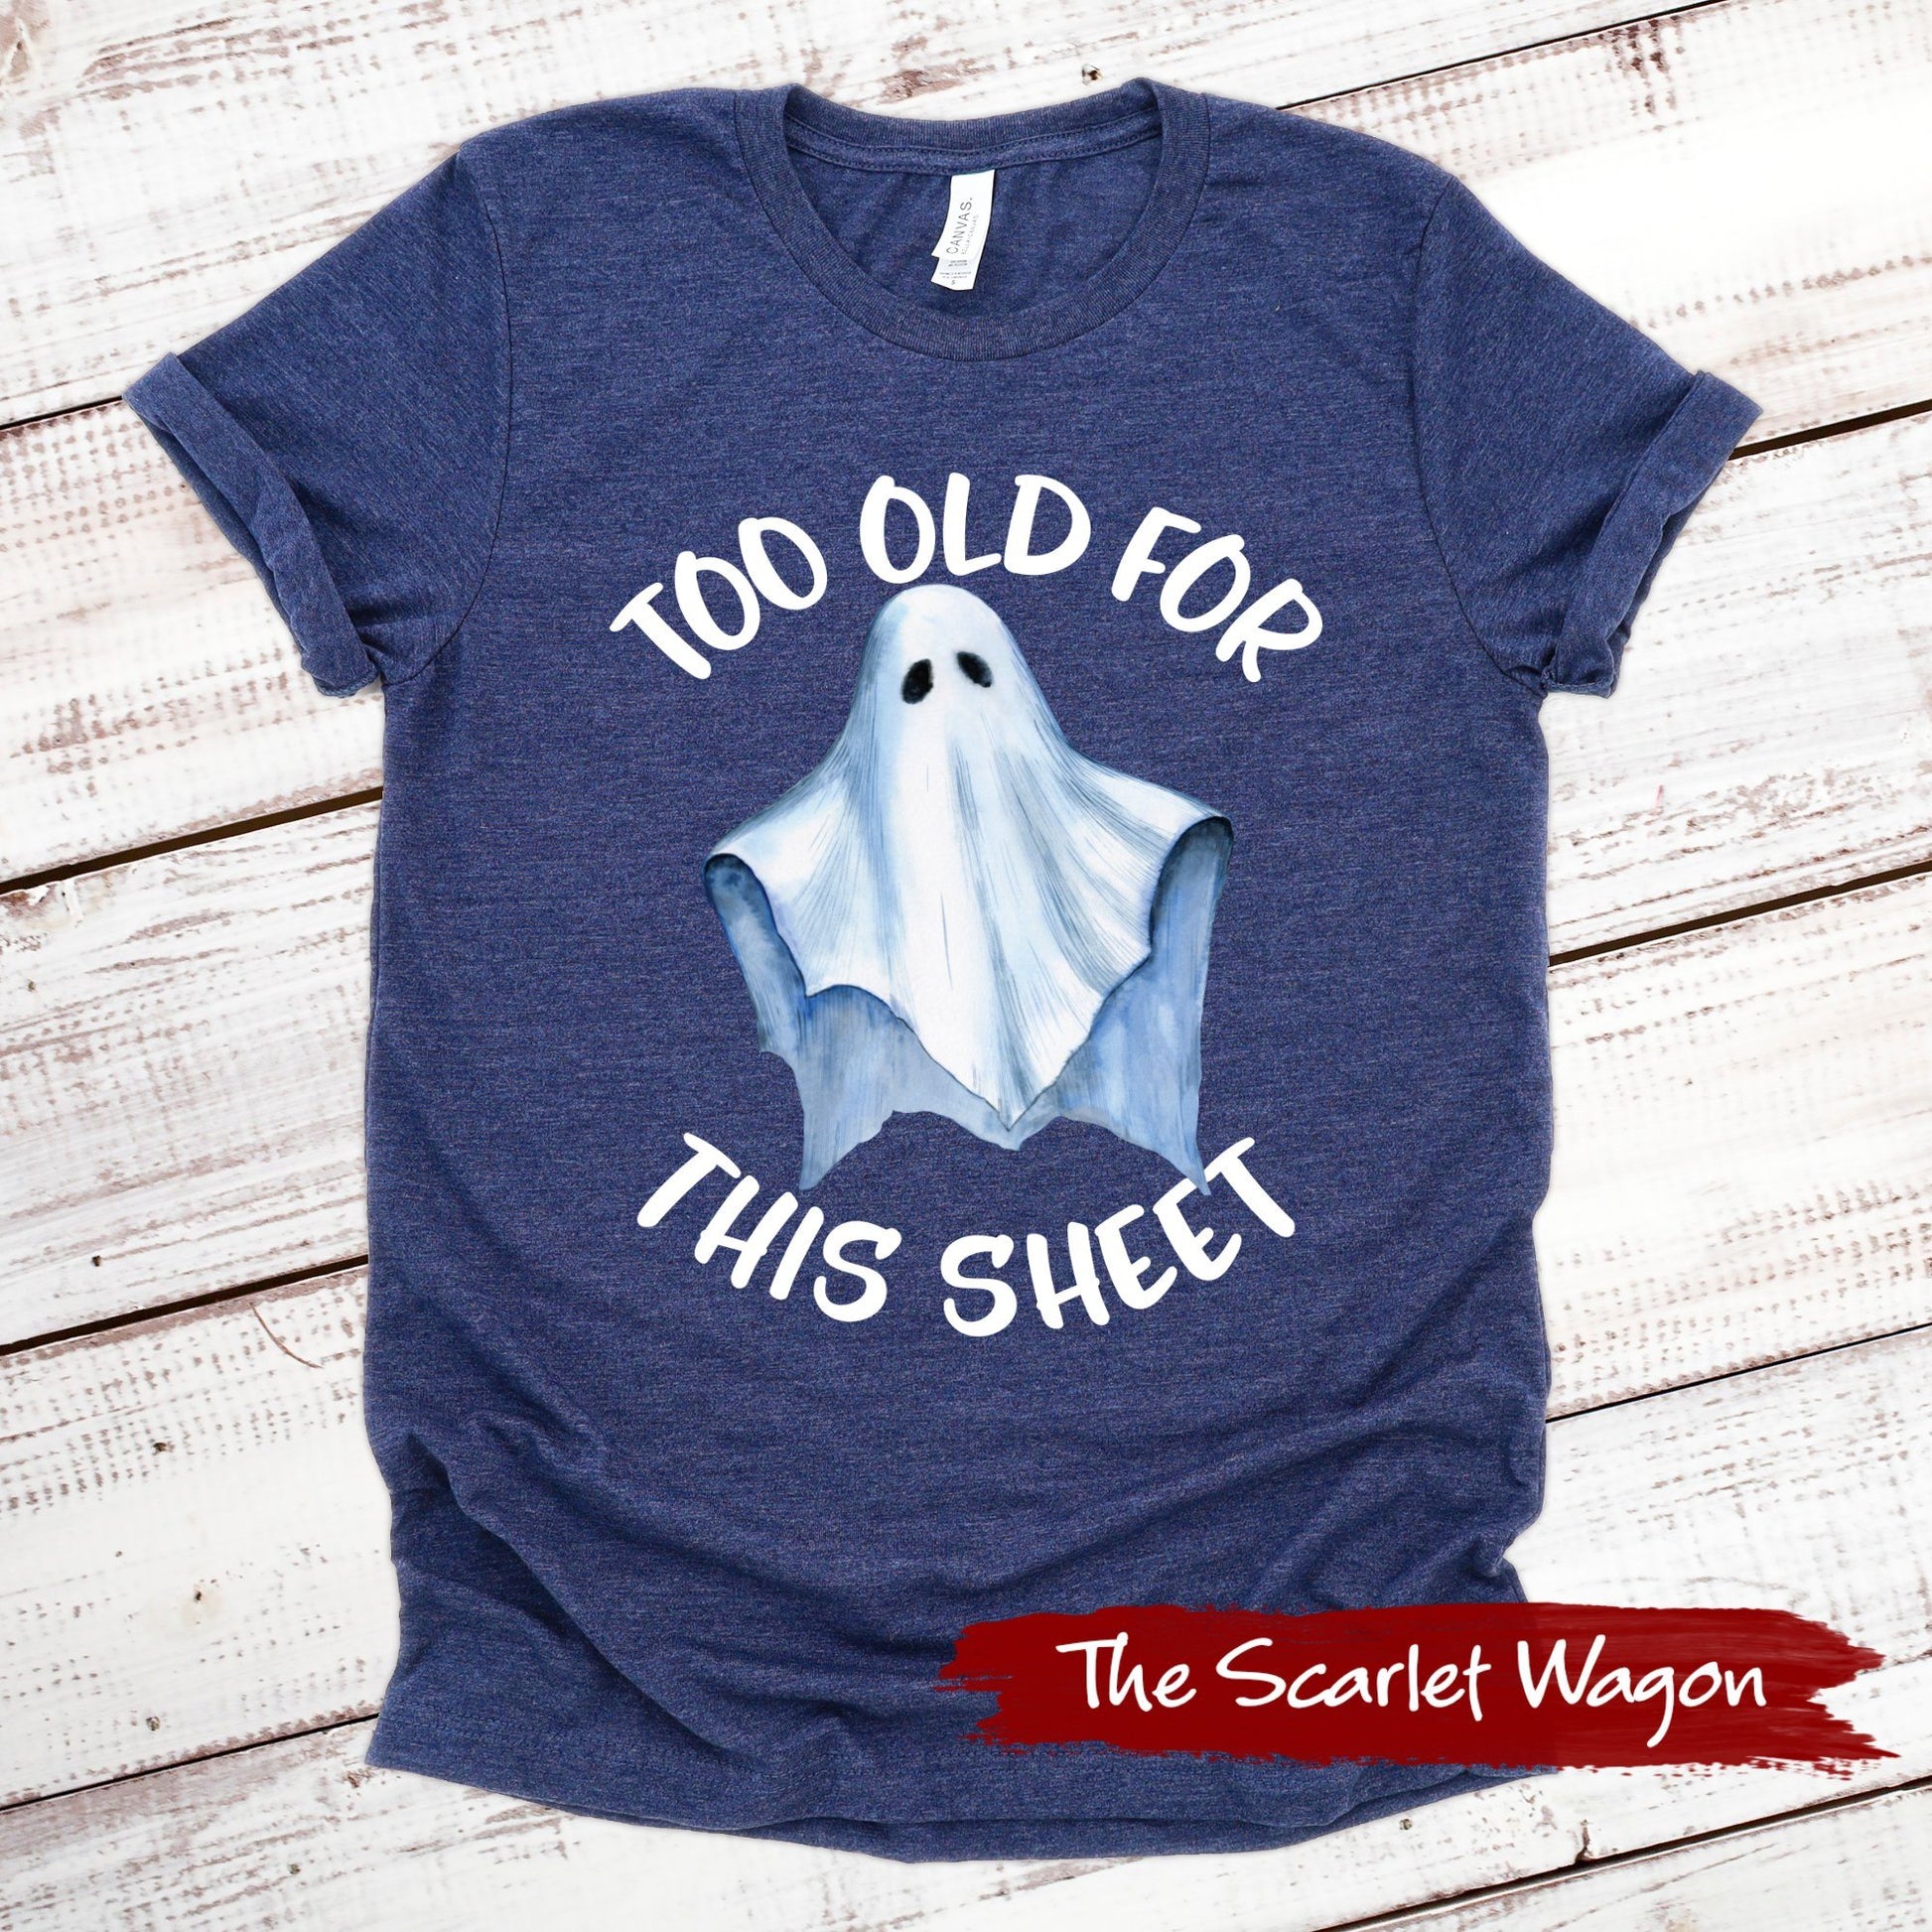 Too Old for This Sheet Halloween Shirt Scarlet Wagon Heather Navy XS 